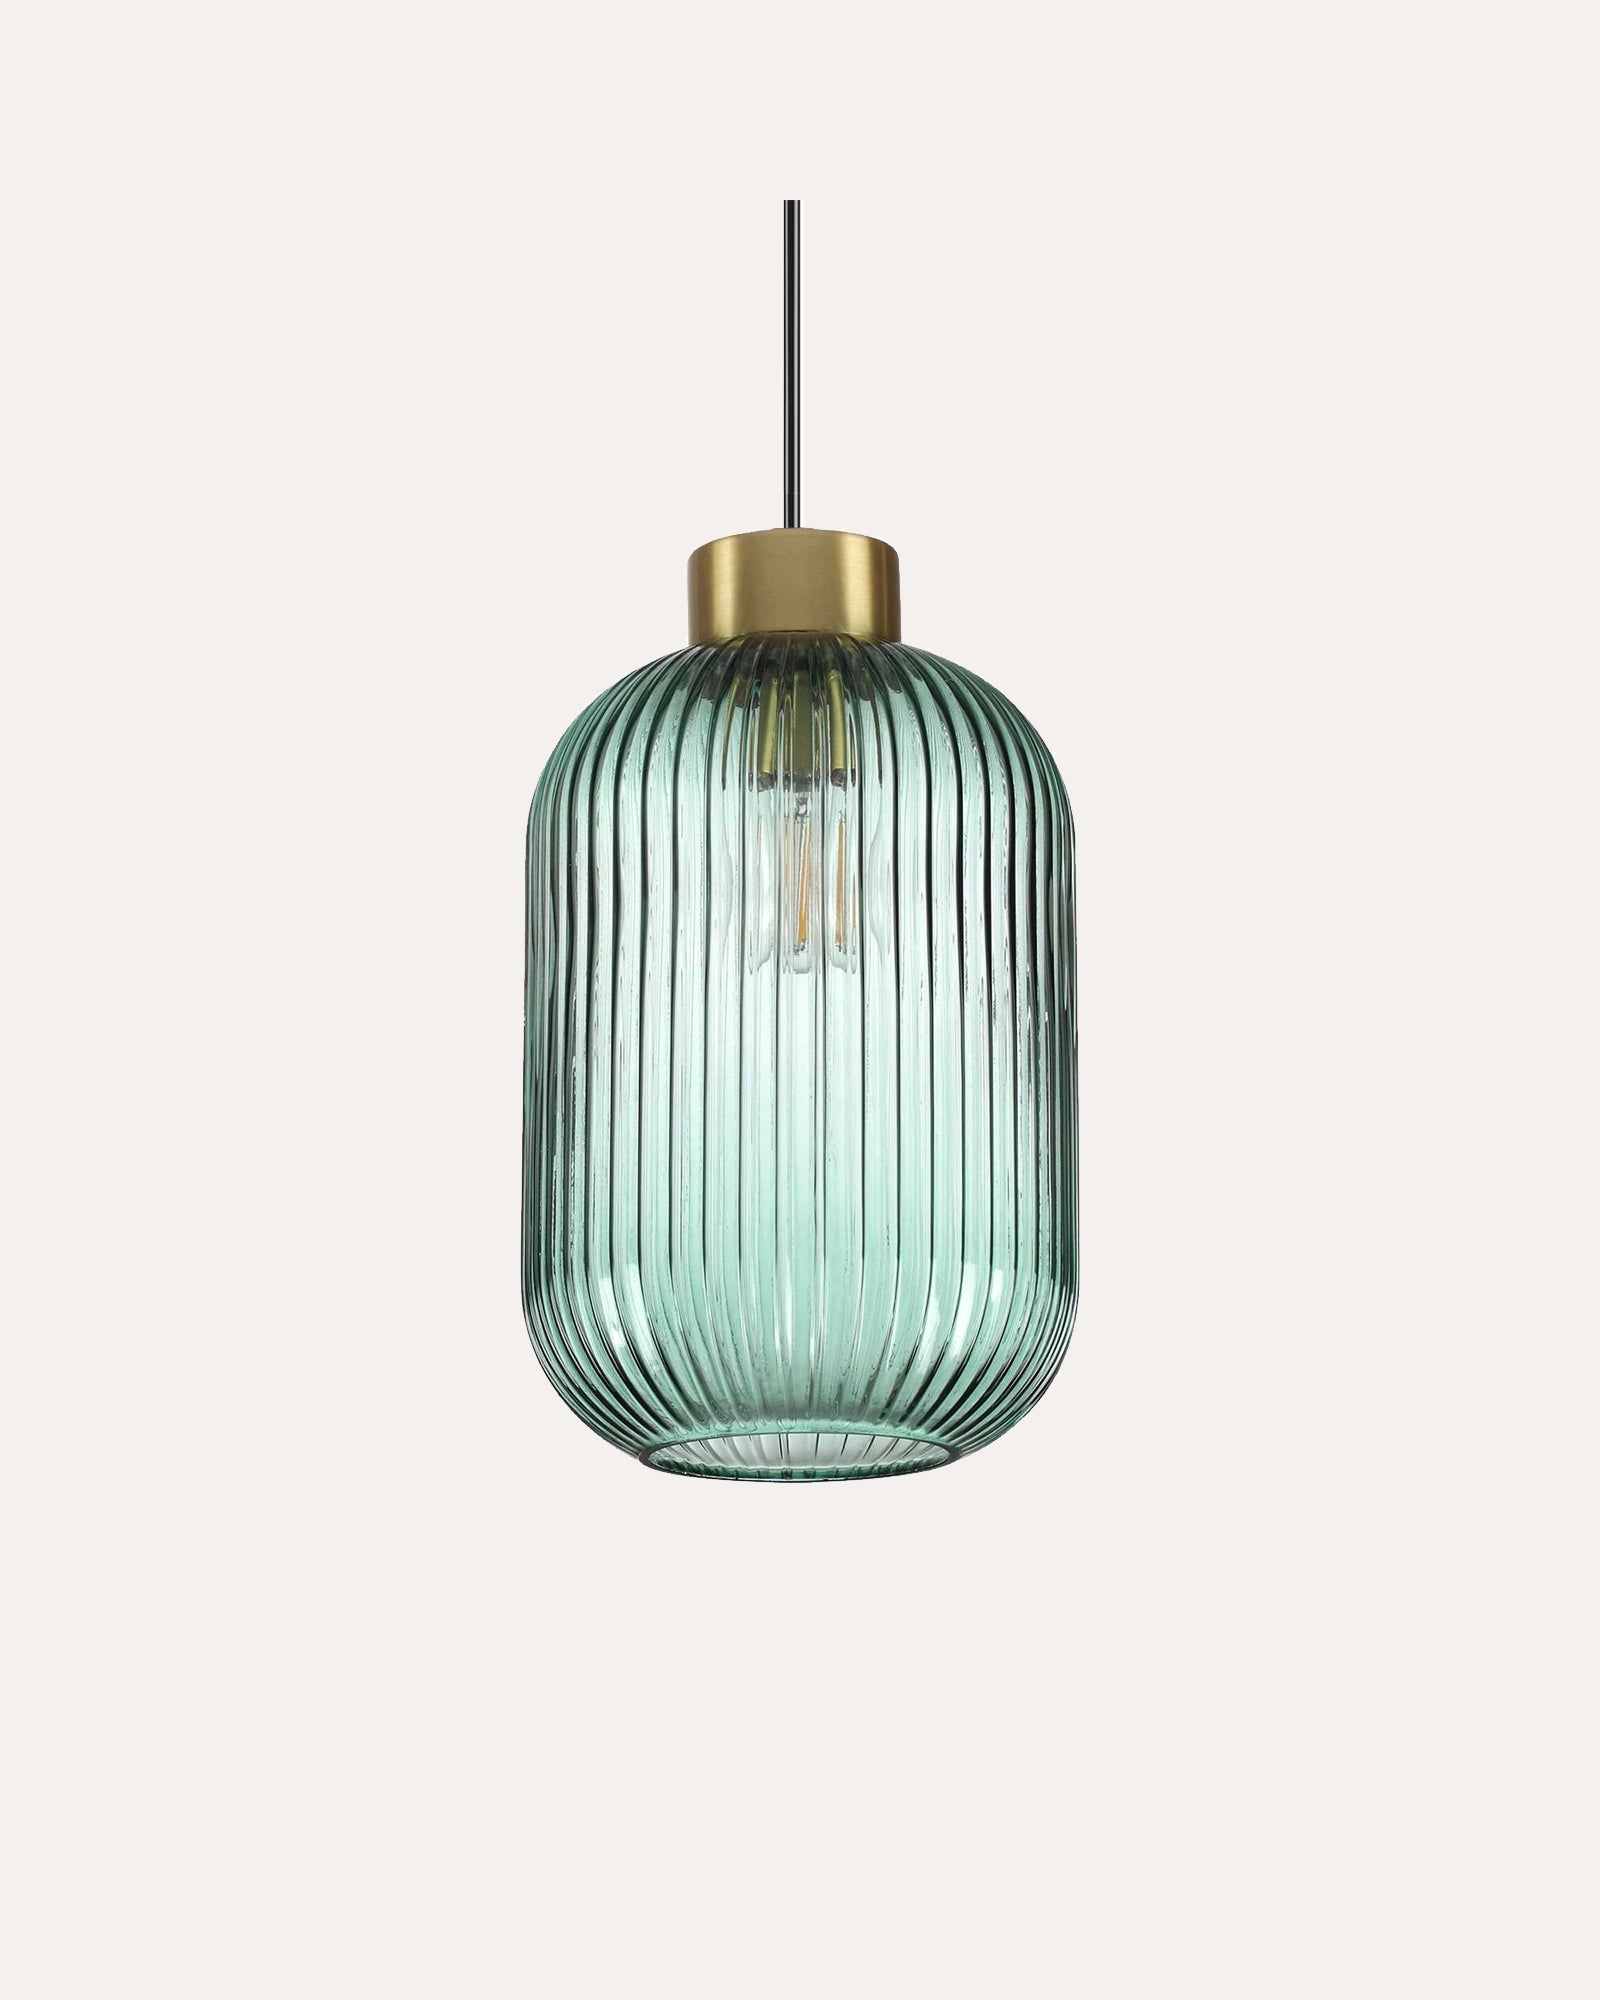 Mint Pendant Light in Green by Ideal Lux Lighting at Nook Collections